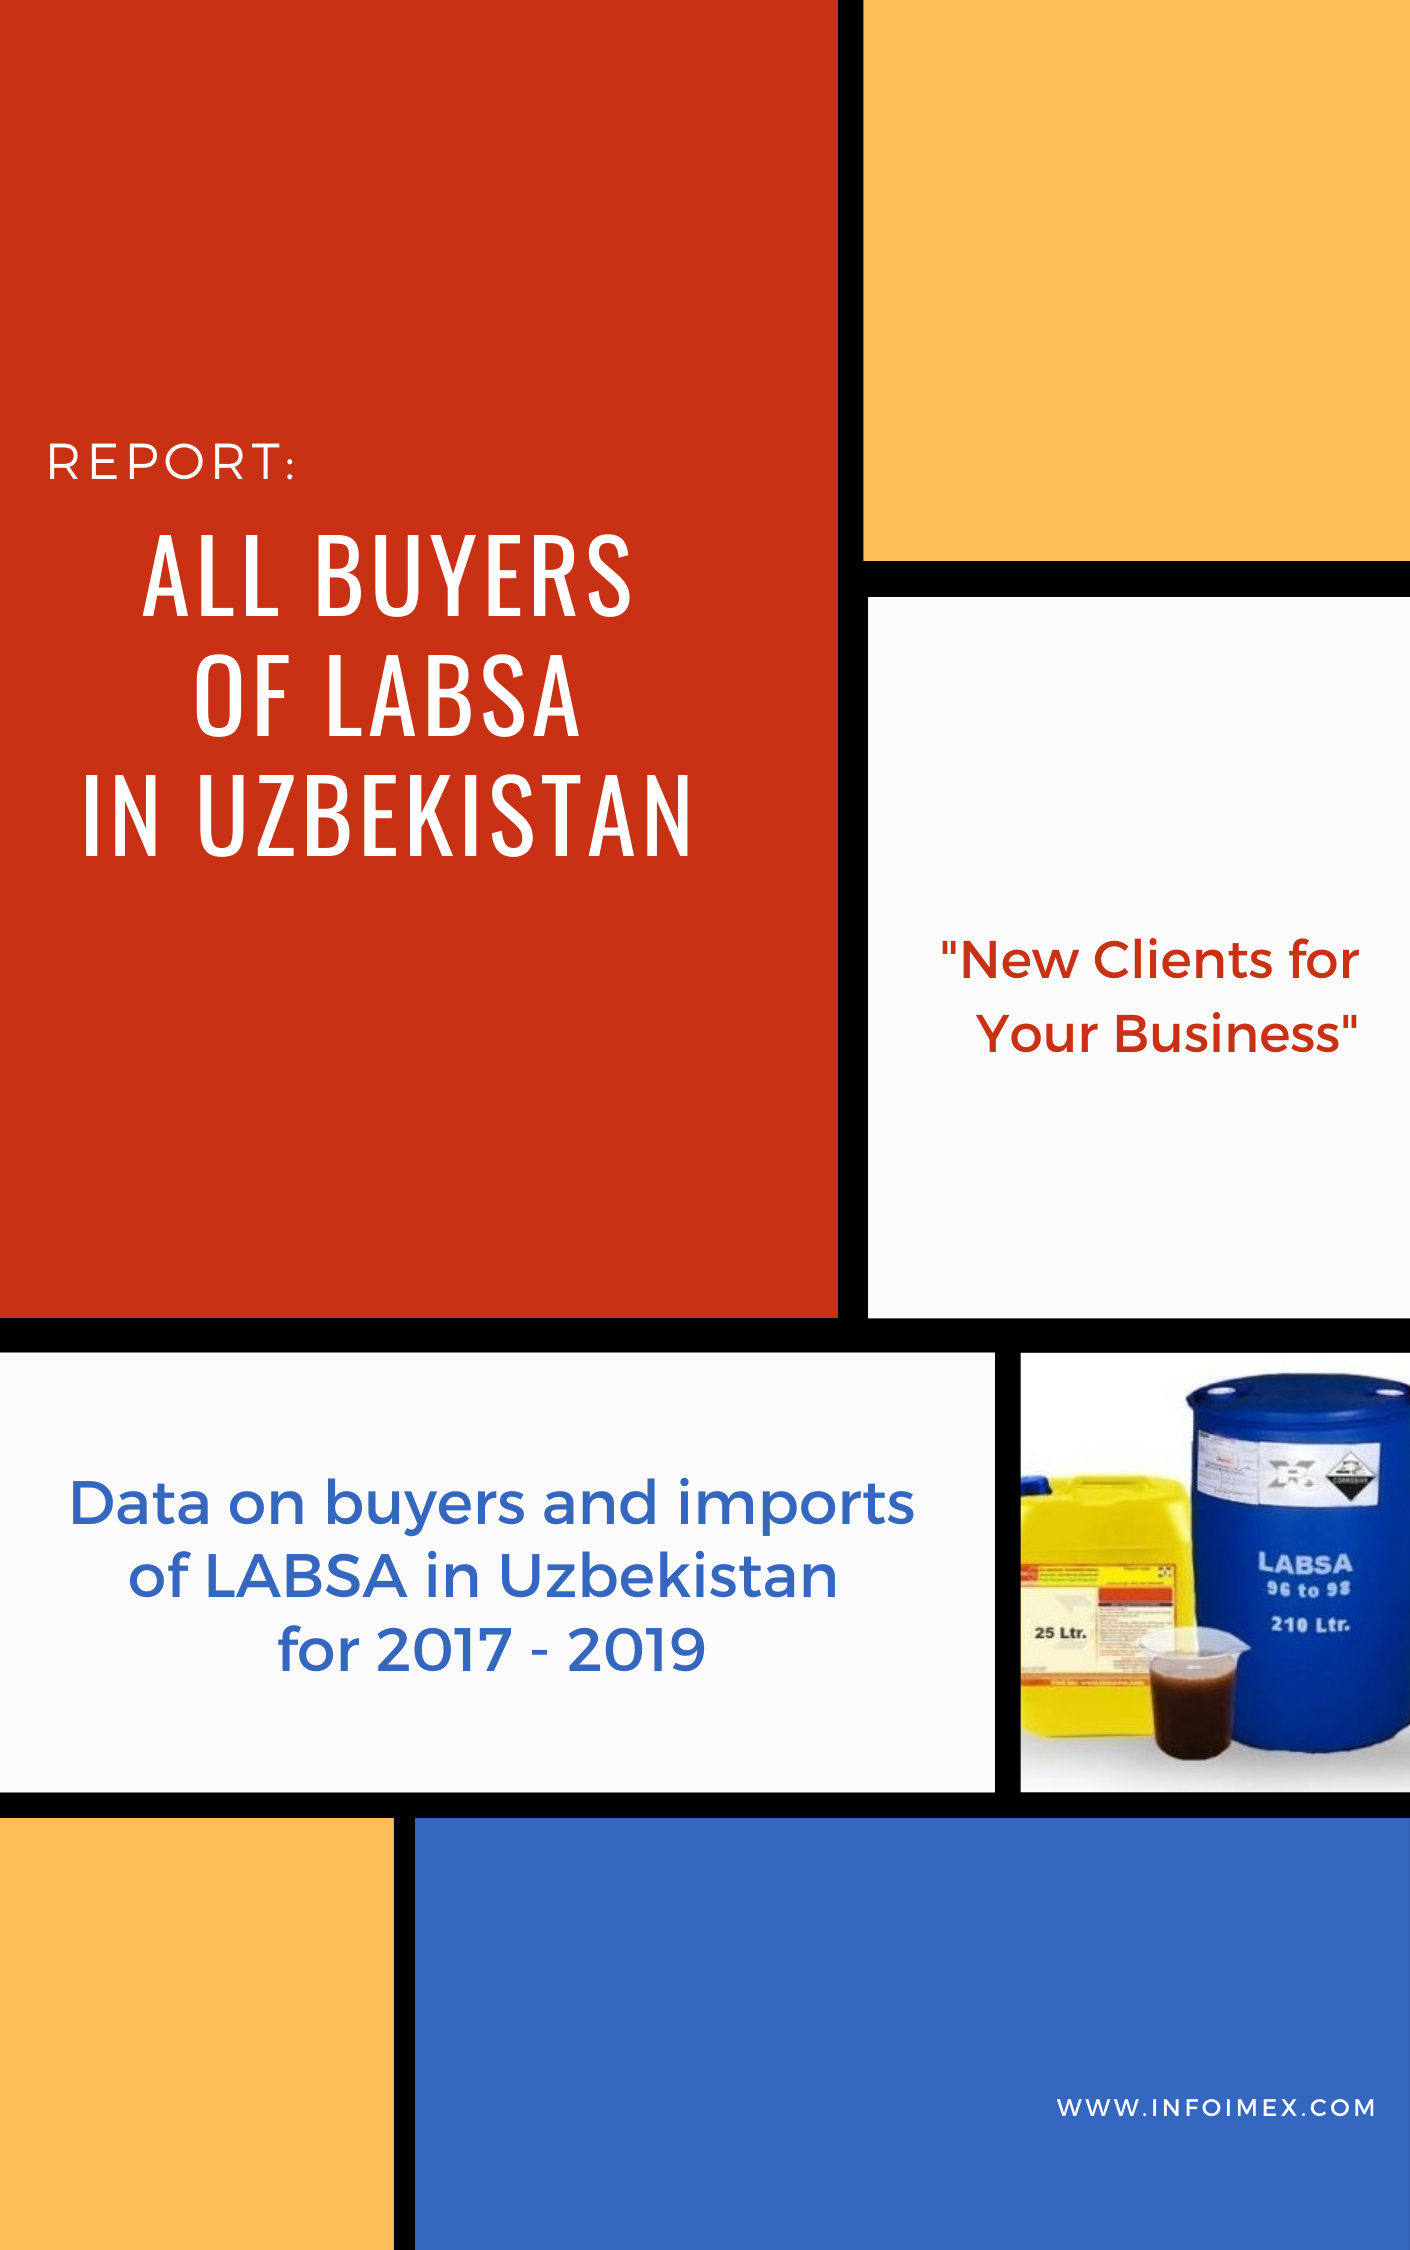 All consumers of LABSA in Uzbekistan